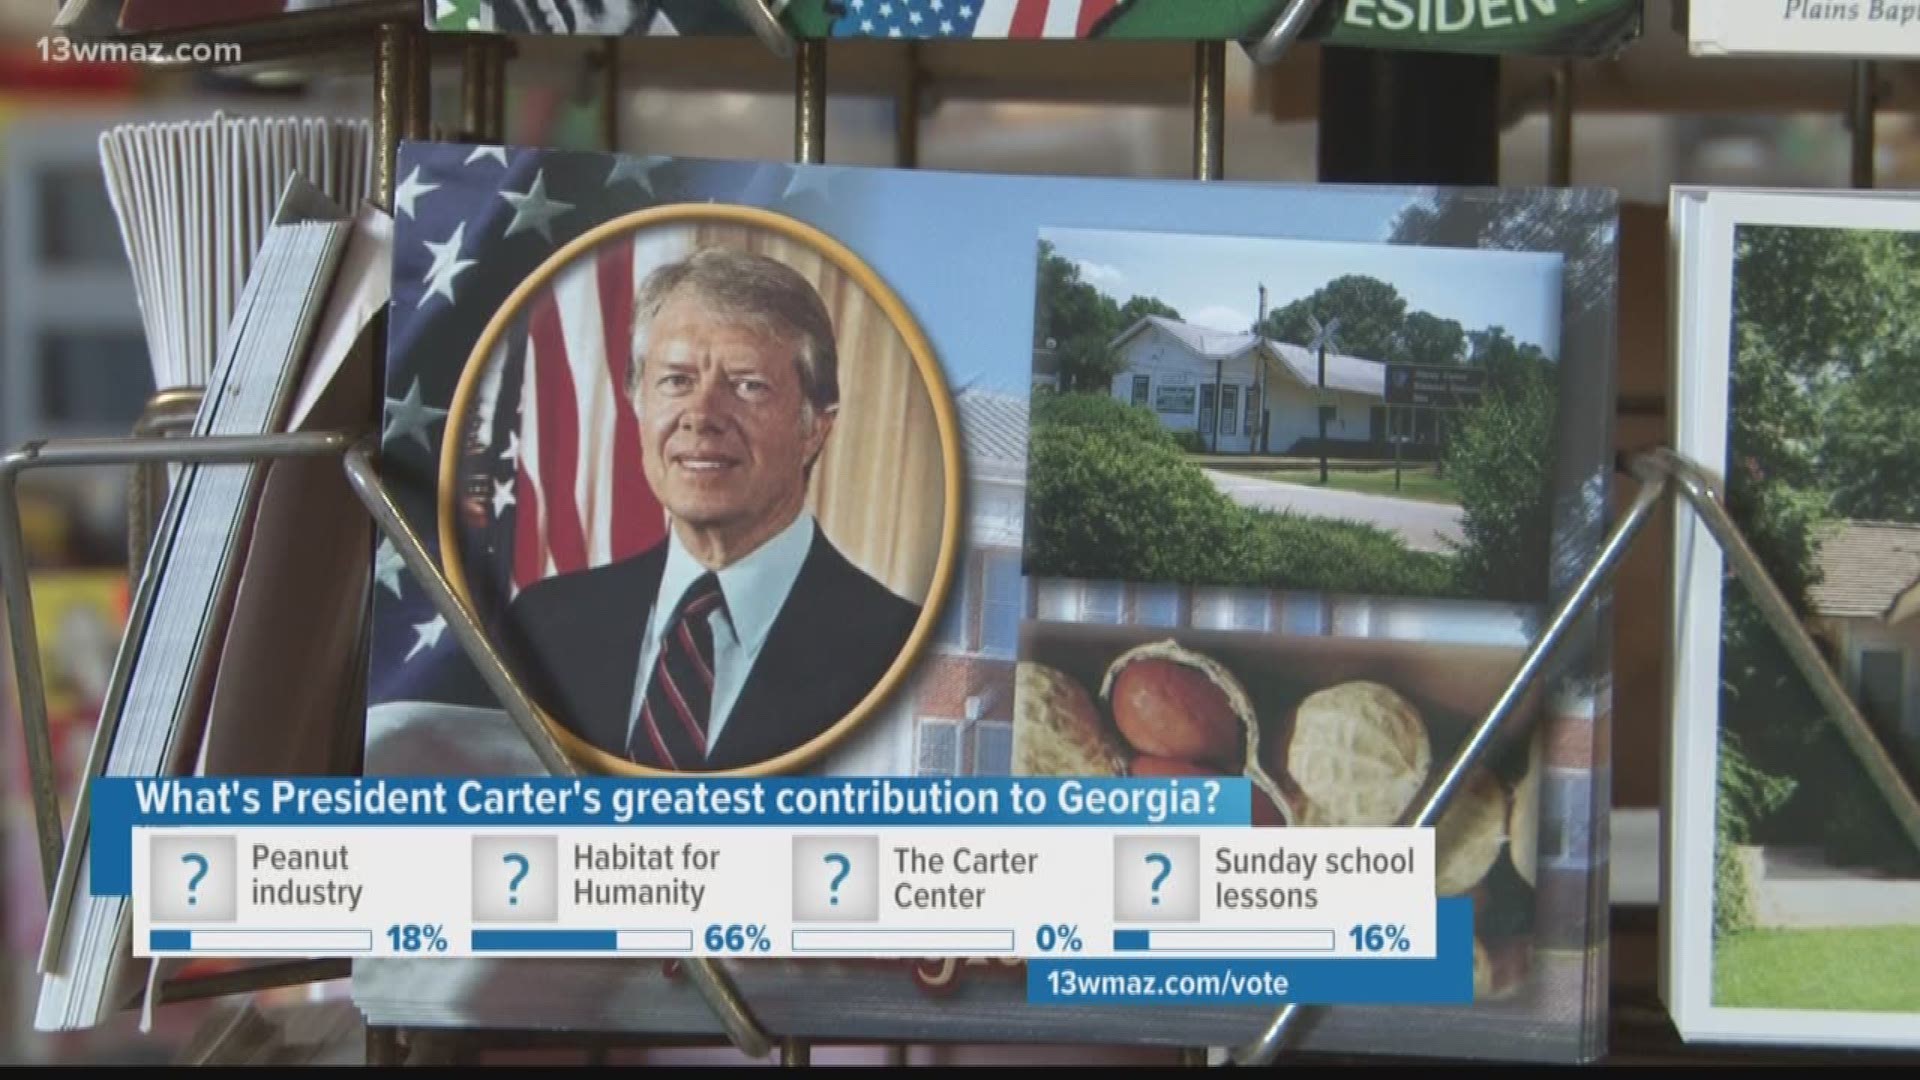 Unlike many presidents before and since, when he left the White House in 1981, Jimmy Carter didn't go on a speaking tour or stay in Washington.